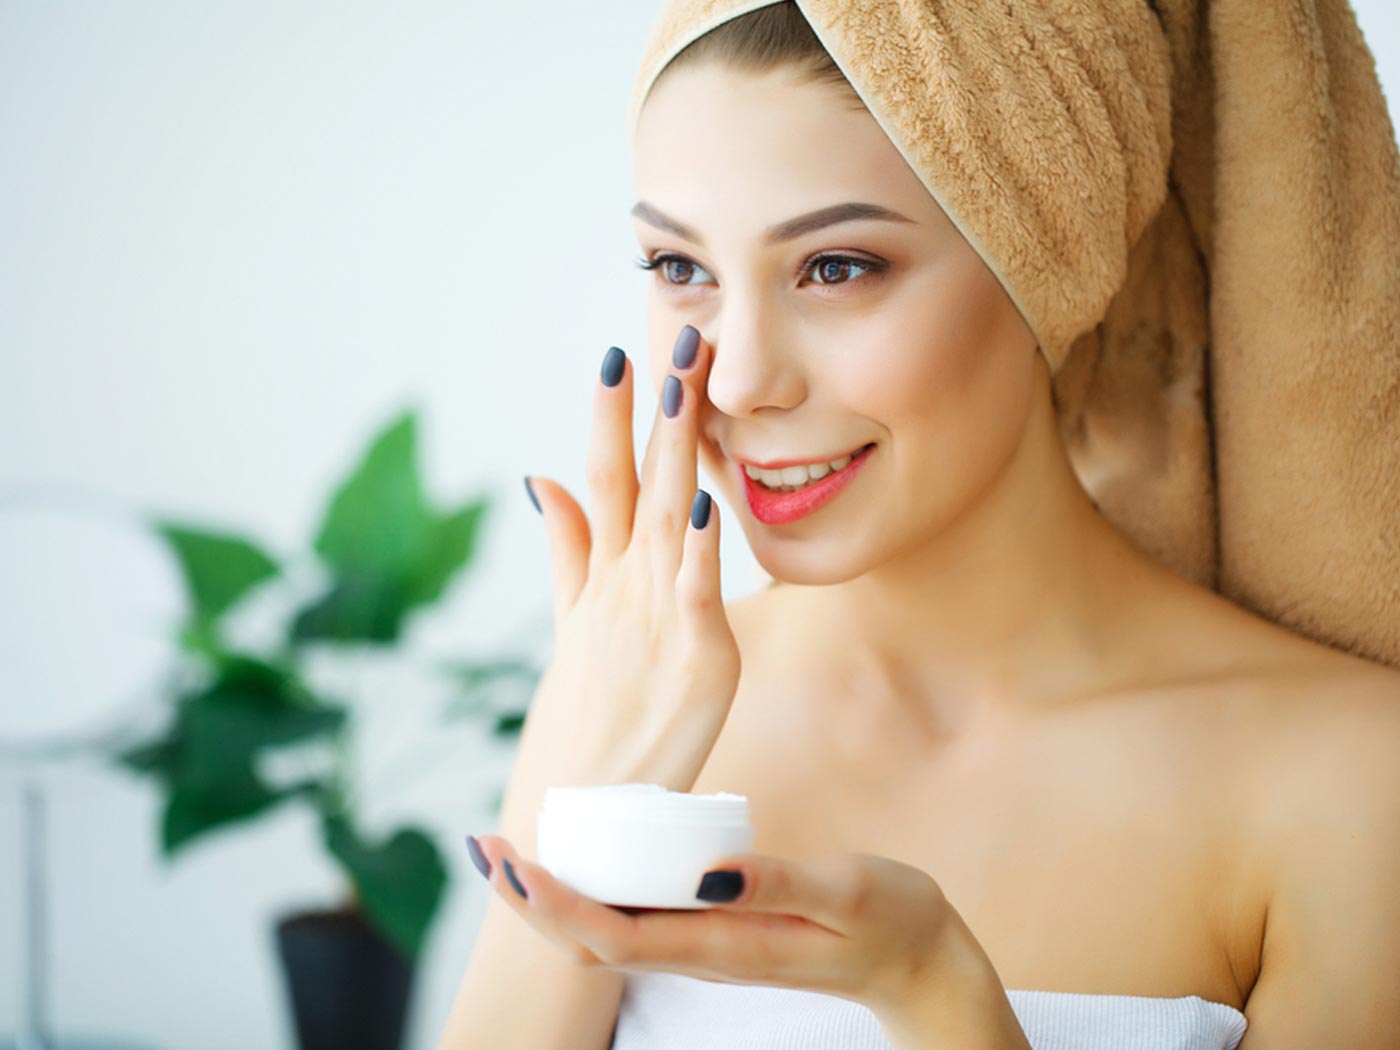 Skin Care and Beauty: Your Ultimate Guide to Radiant and Glowing Skin